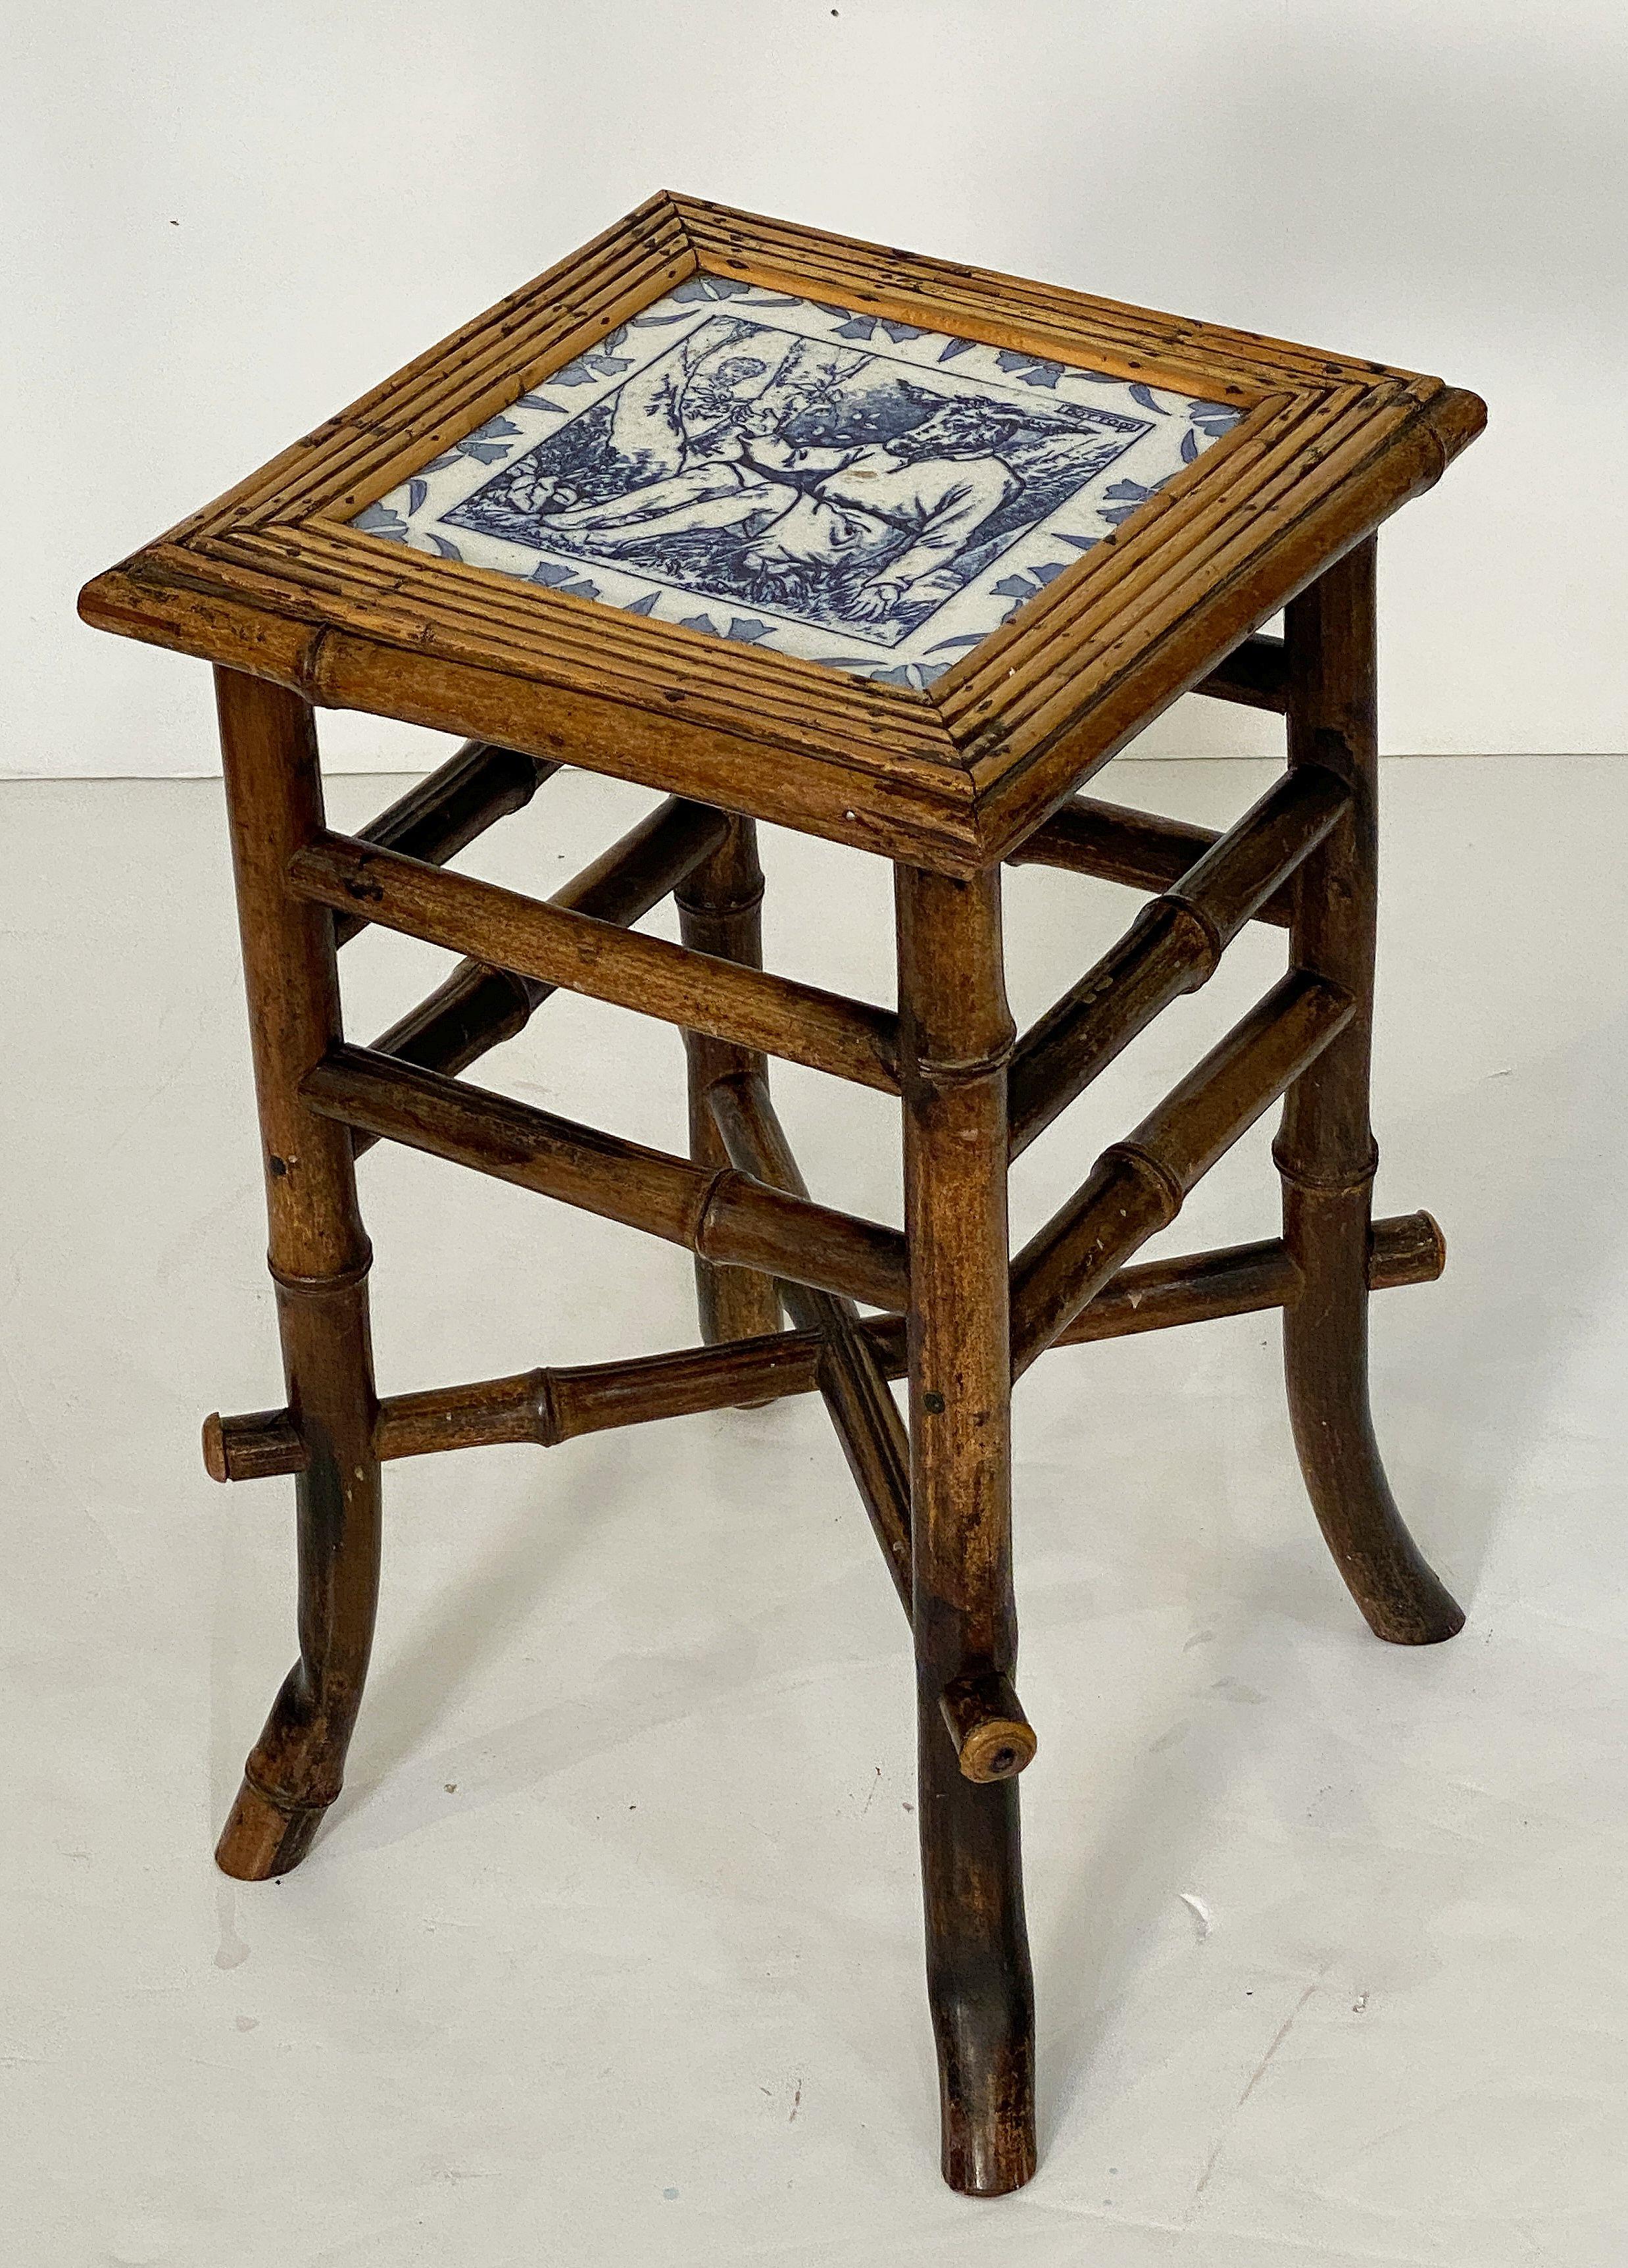 A fine English bamboo table or stool from the Aesthetic Movement period of the late 19th century, featuring a handsome patinated finish and square seat of bamboo with inset blue and white ceramic tile by Wedgwood of the donkey, Nick Bottom, from